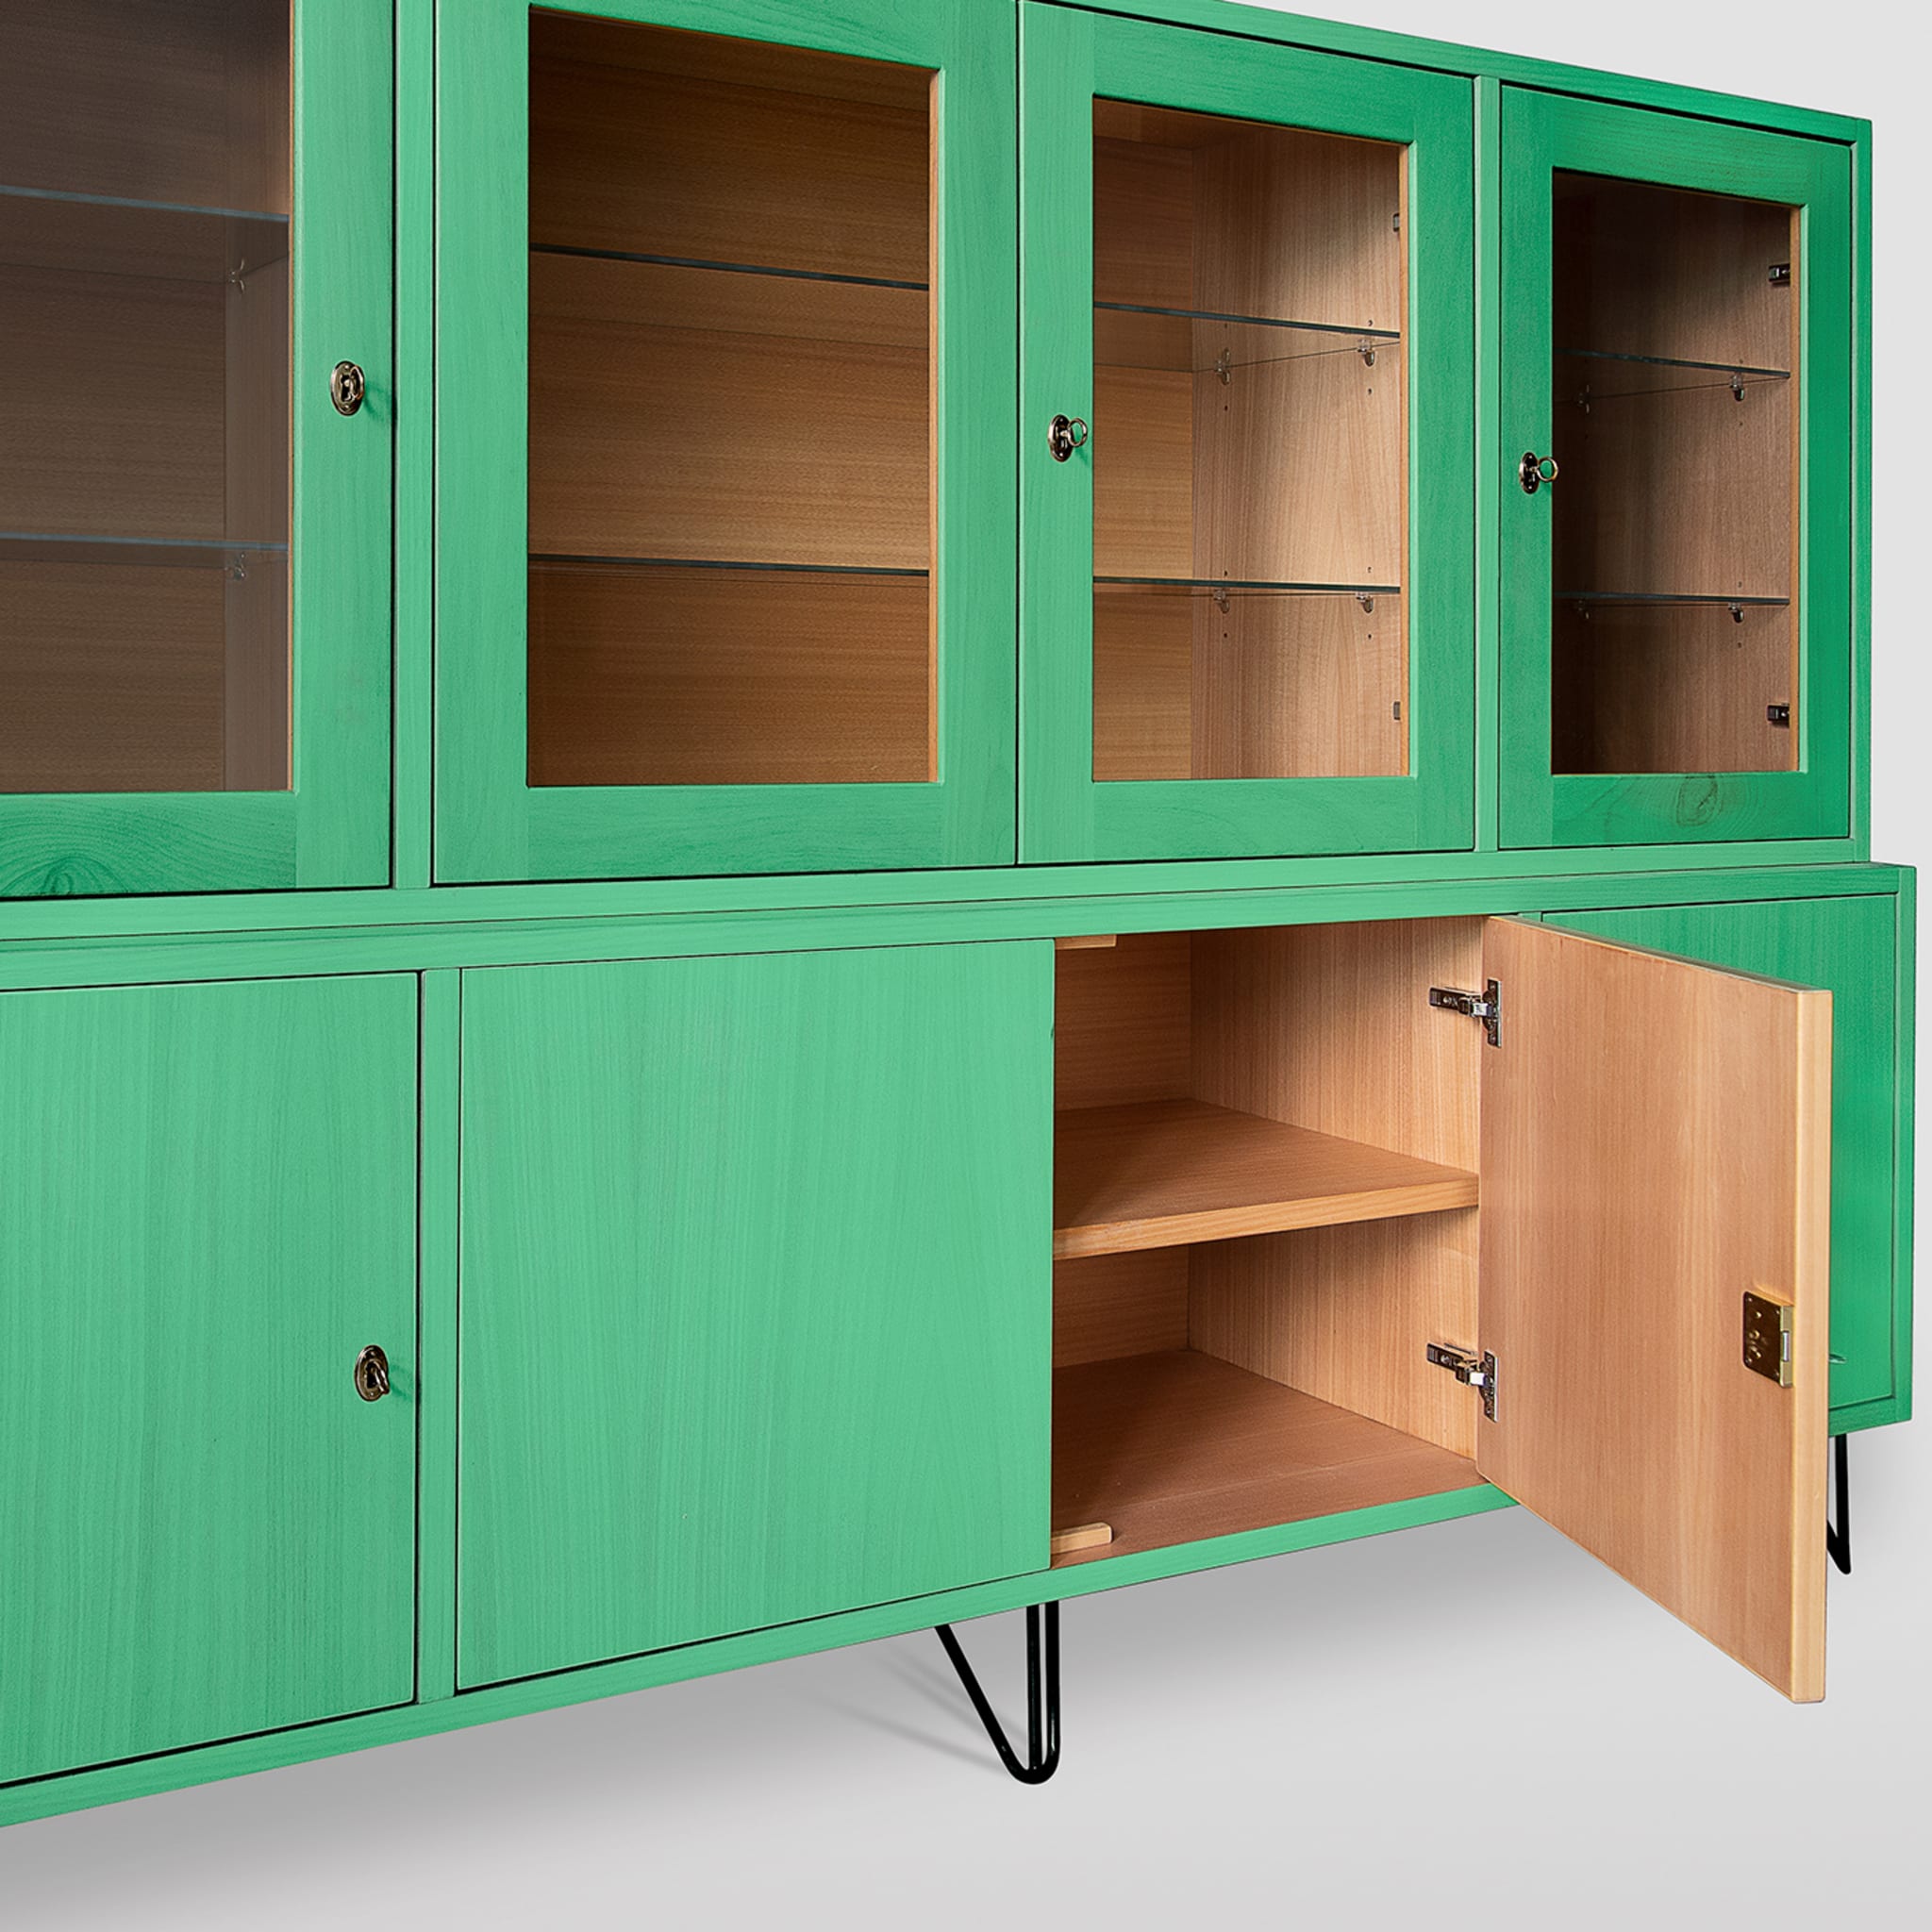 Eroica Mint Green Cabinet by Eugenio Gambella - Alternative view 1